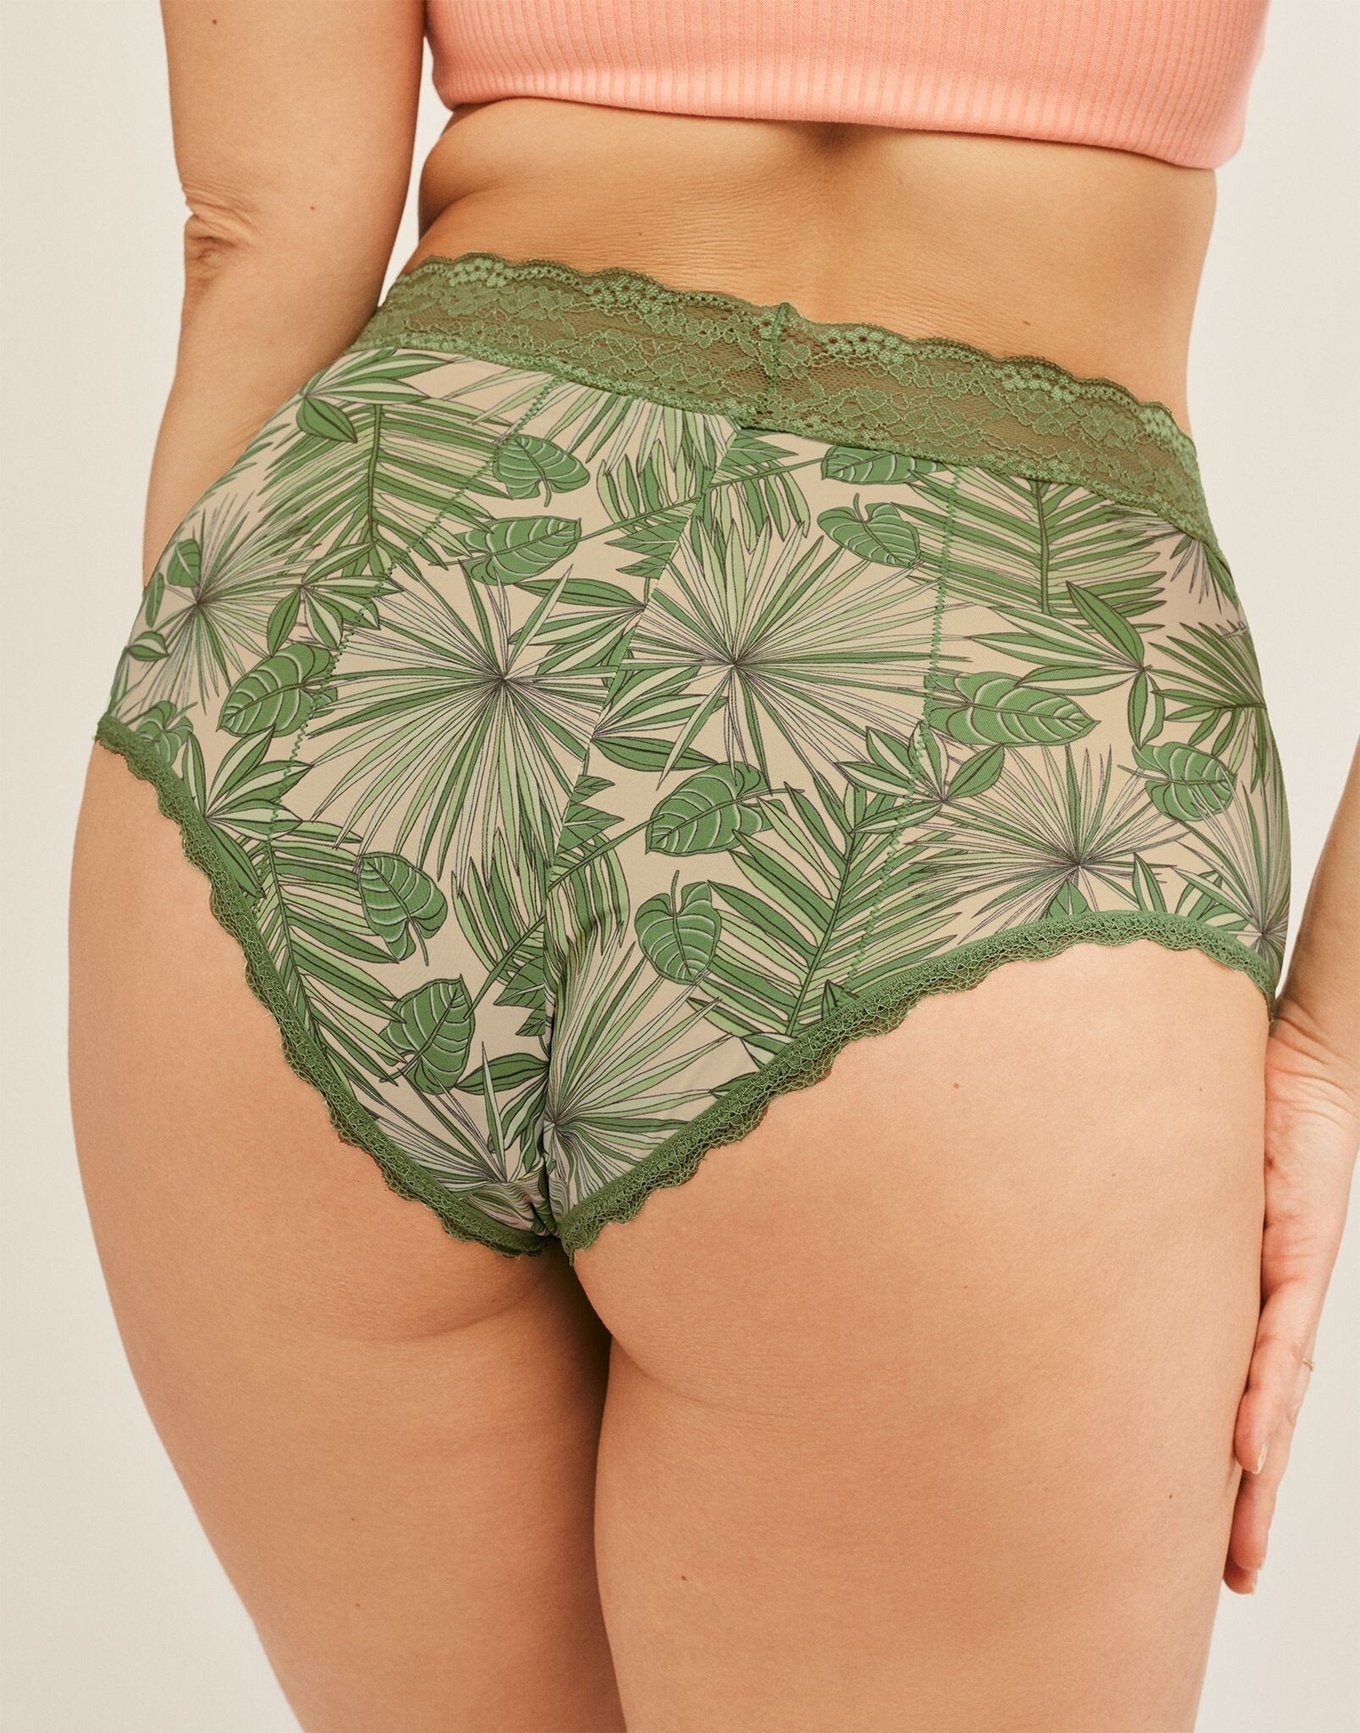 Joyja Amelia period-proof panty in color Breezy Palms  and shape high waisted